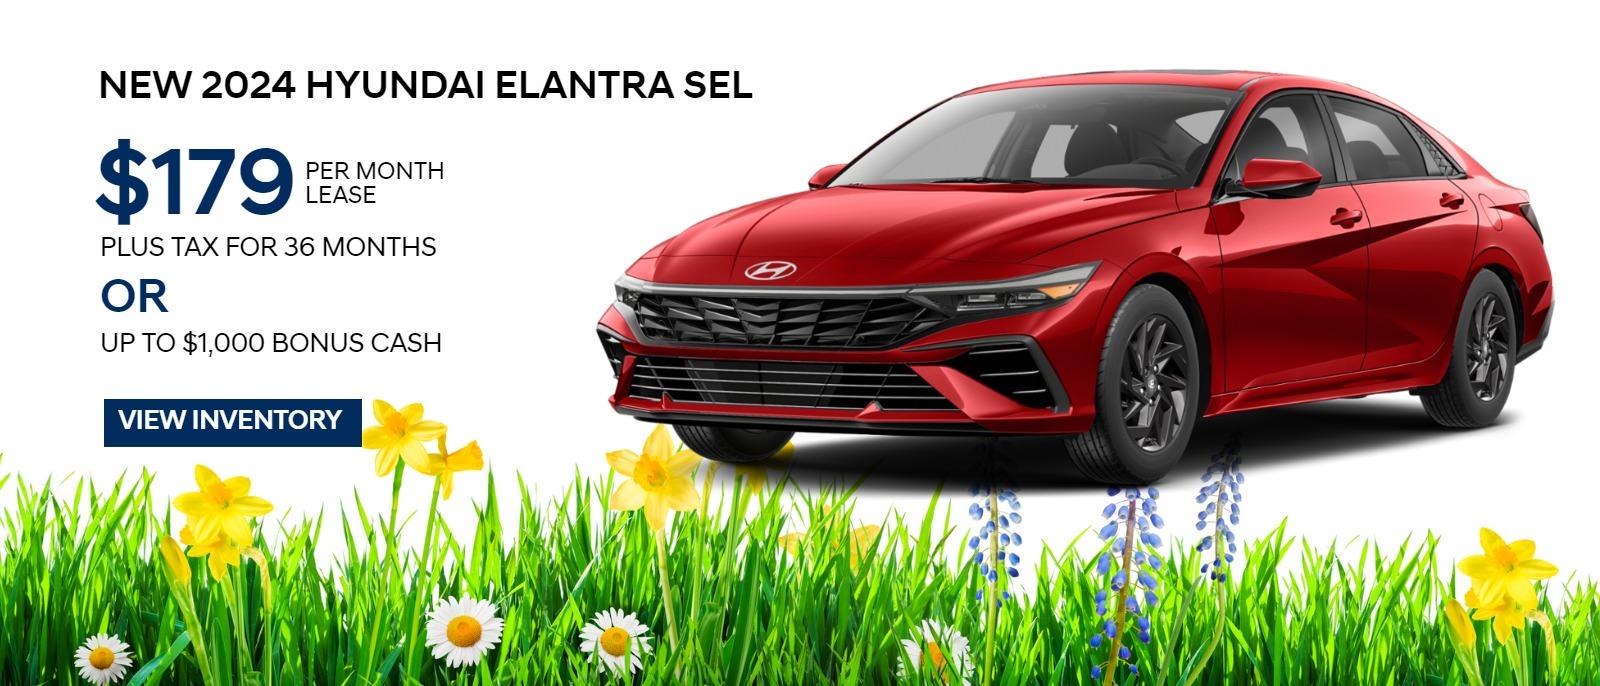 New 2024 Hyundai Elantra SEL
$179/Mo. Lease + tax for 36 months*
OR up to $1,000 Bonus Cash